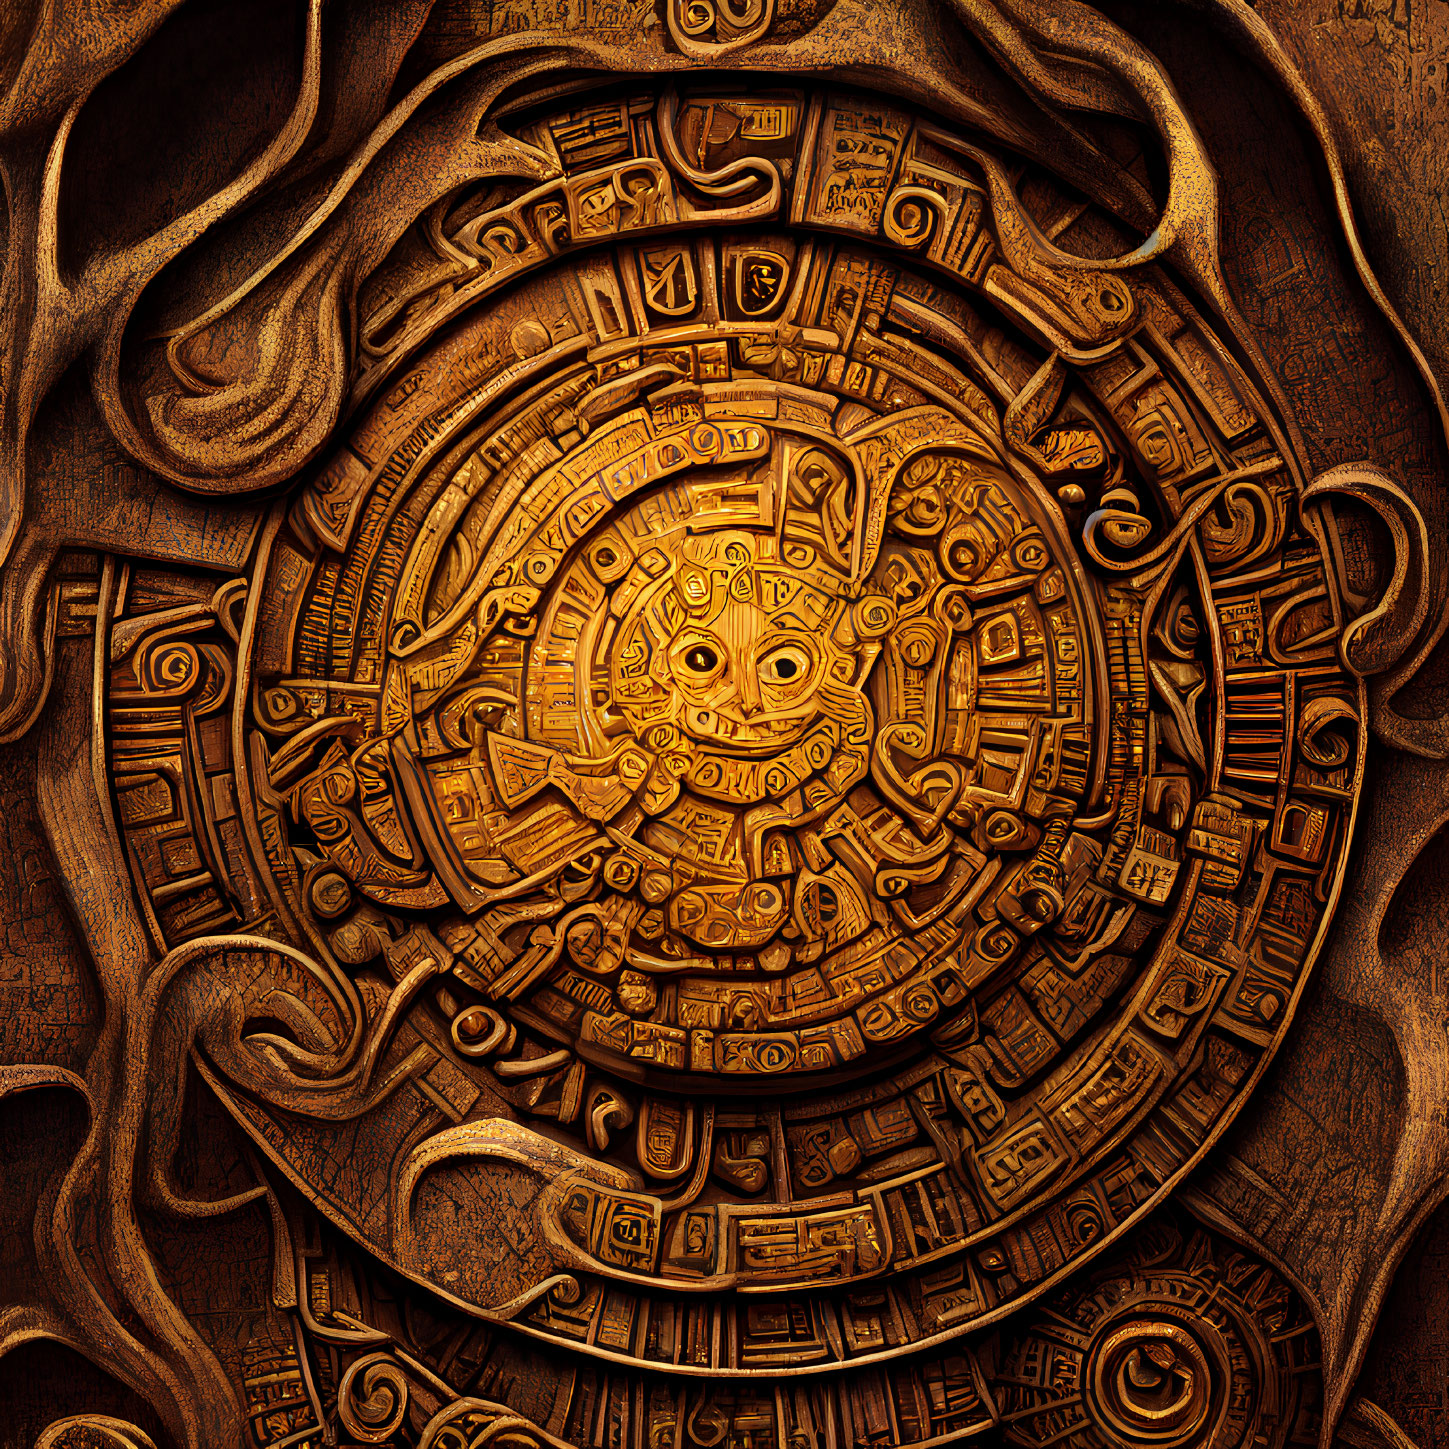 Circular stone calendar with Aztec or Mayan-style carvings and symbols in warm tones